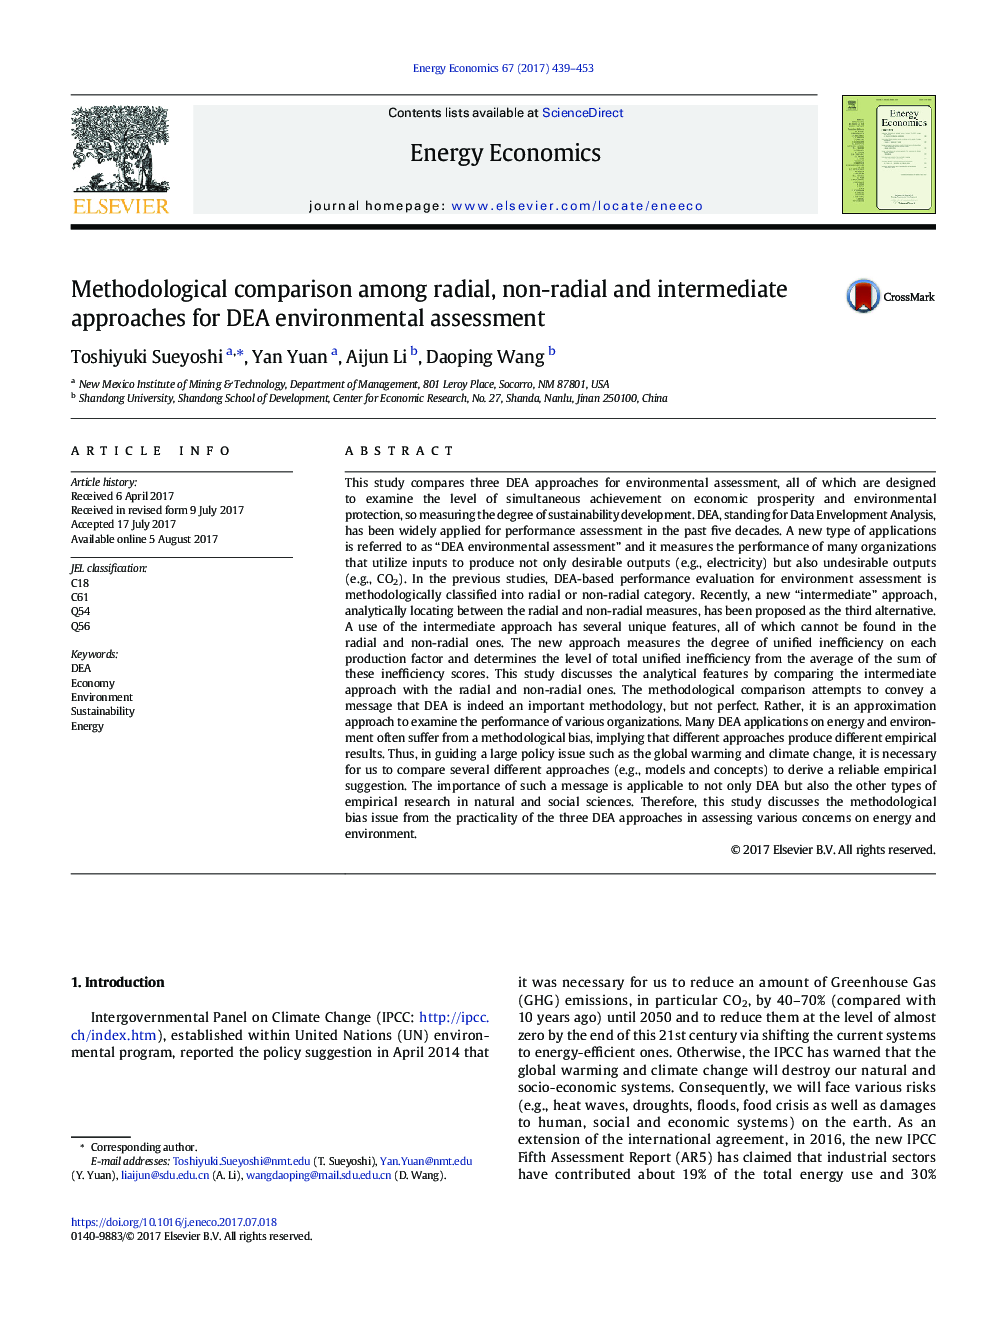 Methodological comparison among radial, non-radial and intermediate approaches for DEA environmental assessment